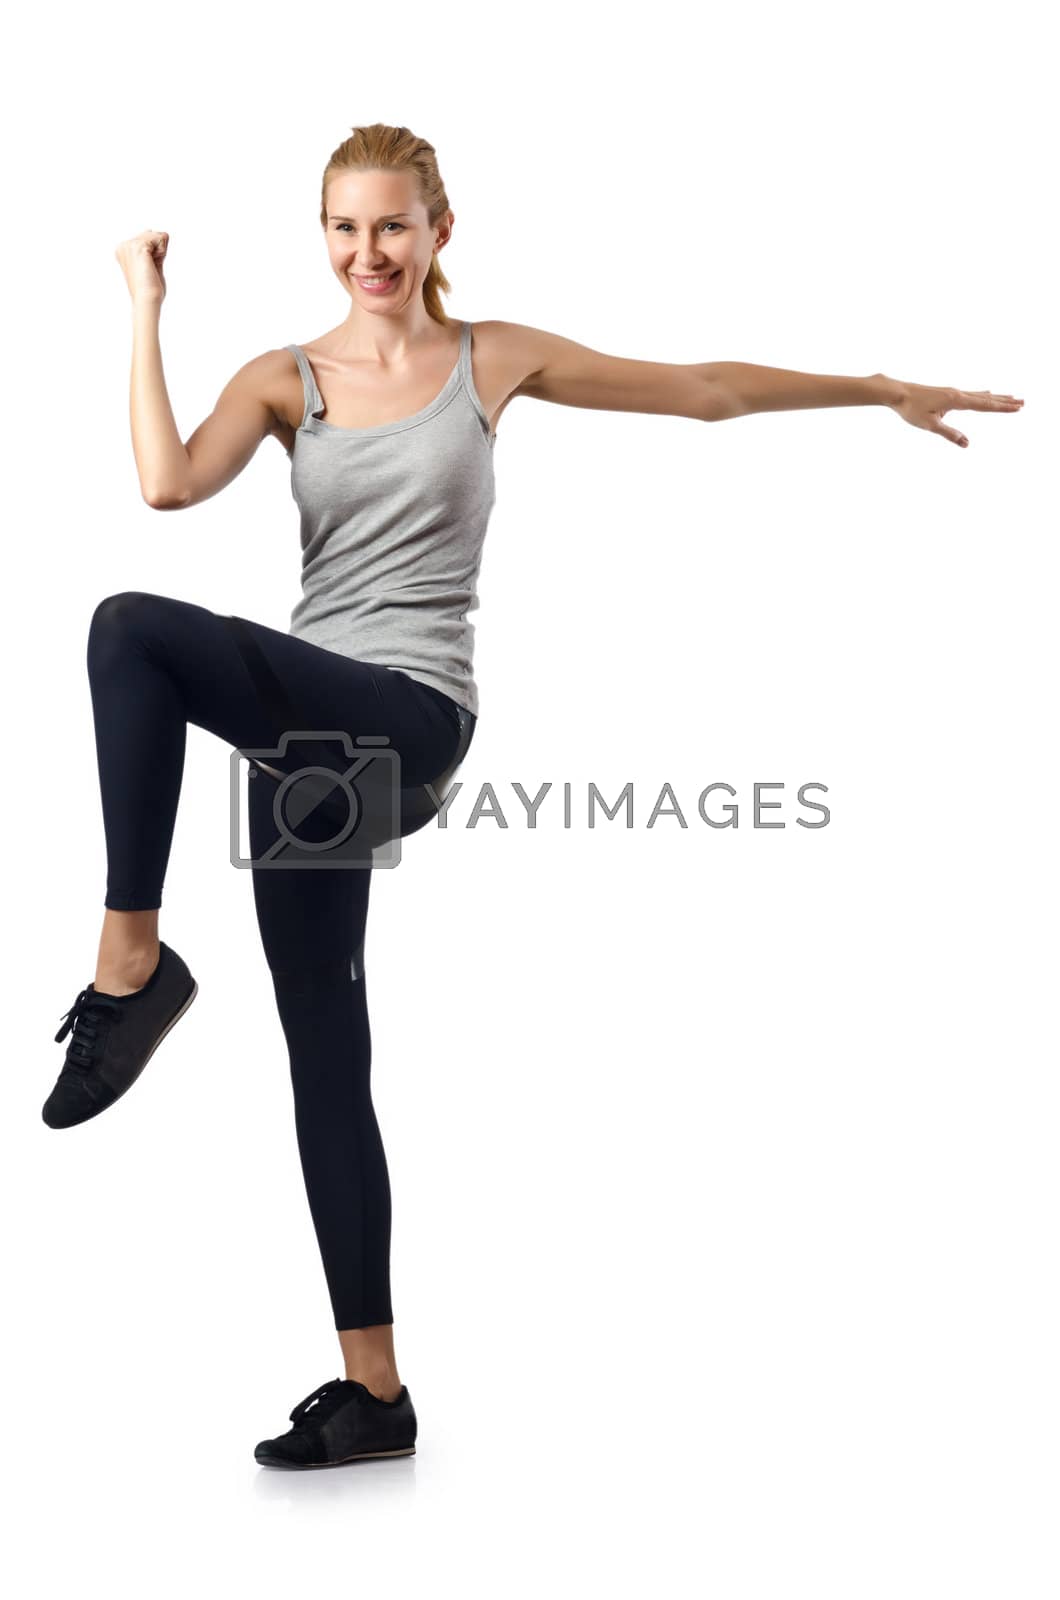 Royalty free image of Woman doing exercises on white by Elnur